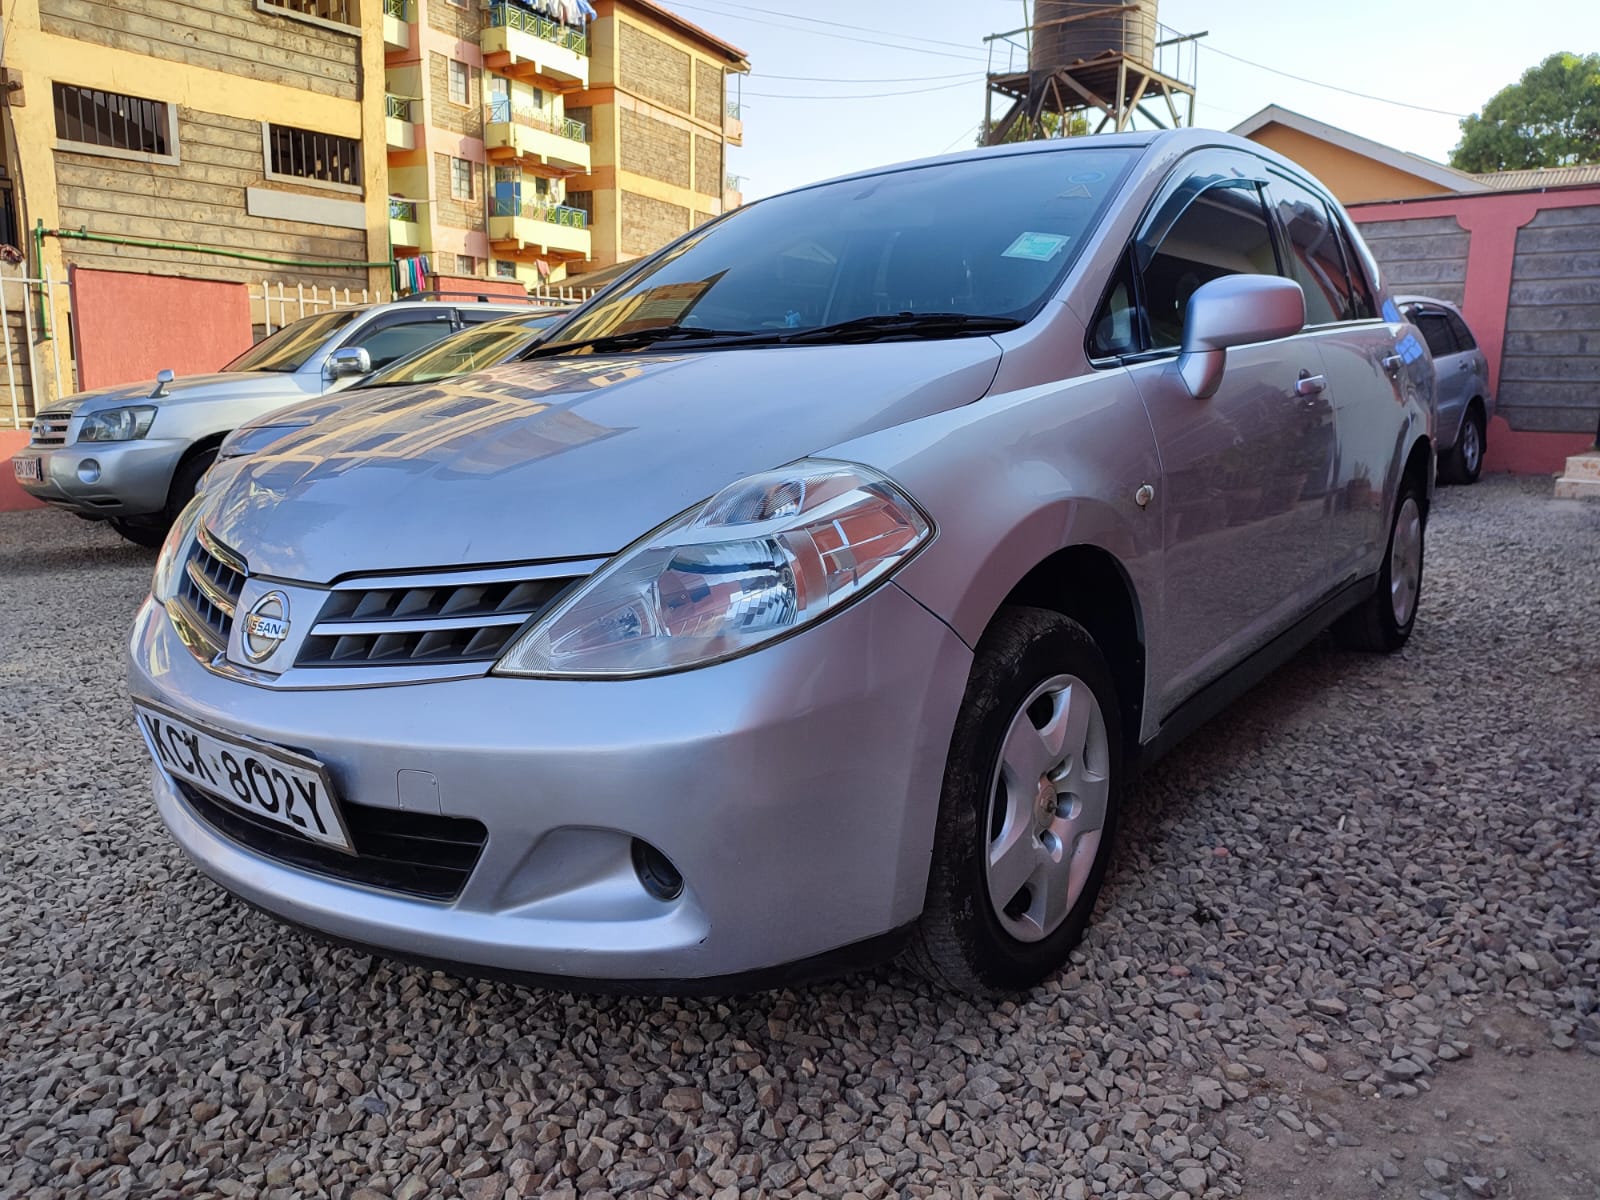 Nissan Tiida QUICK SALE You ONLY Pay 20% Deposit Trade in Ok Wow!